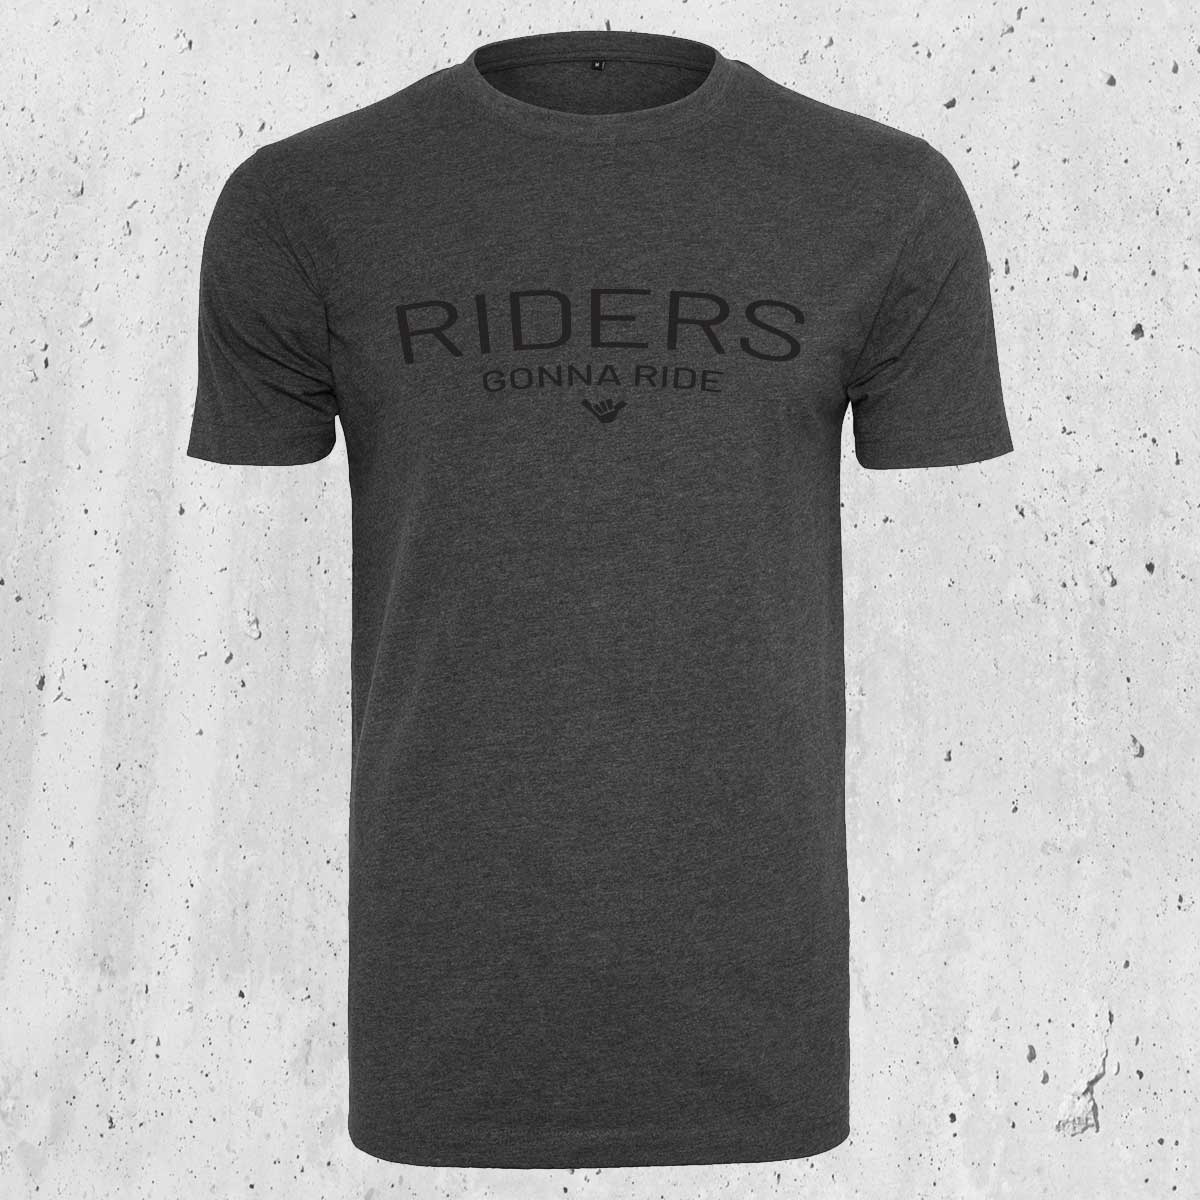 T-Shirt EXECUTIVE RIDERS - RIDERS GONNA RIDE®